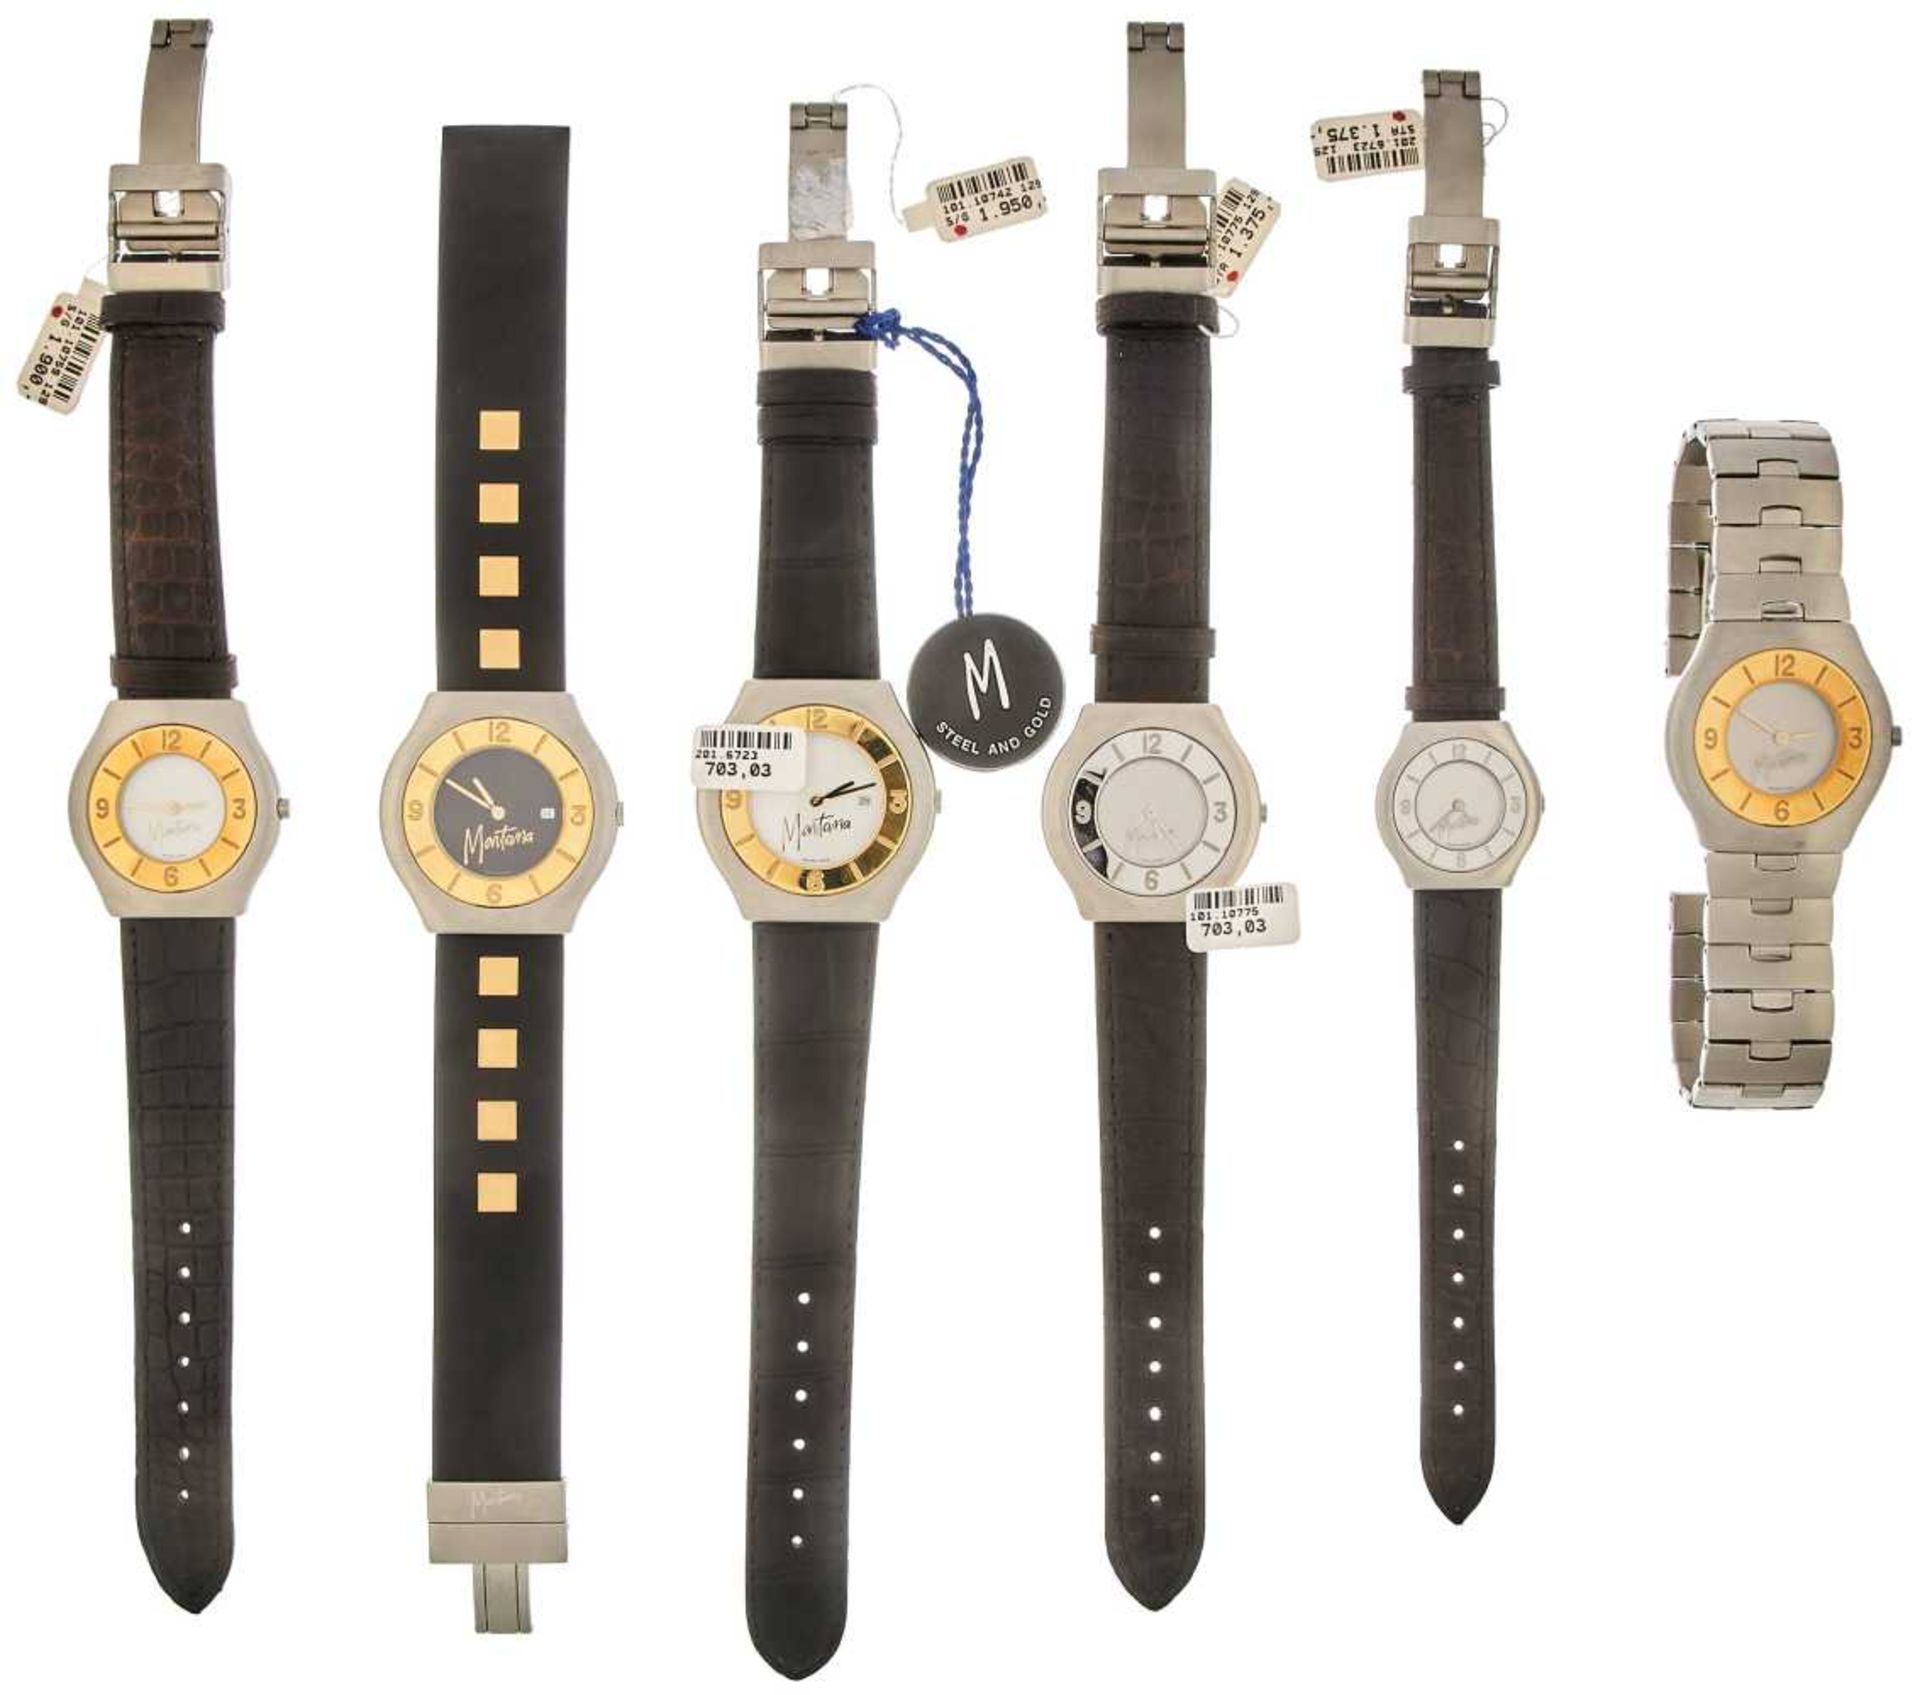 Montana watch company gentlemen / ladies watches. Collection from 6 Montana watches in gold / high-g